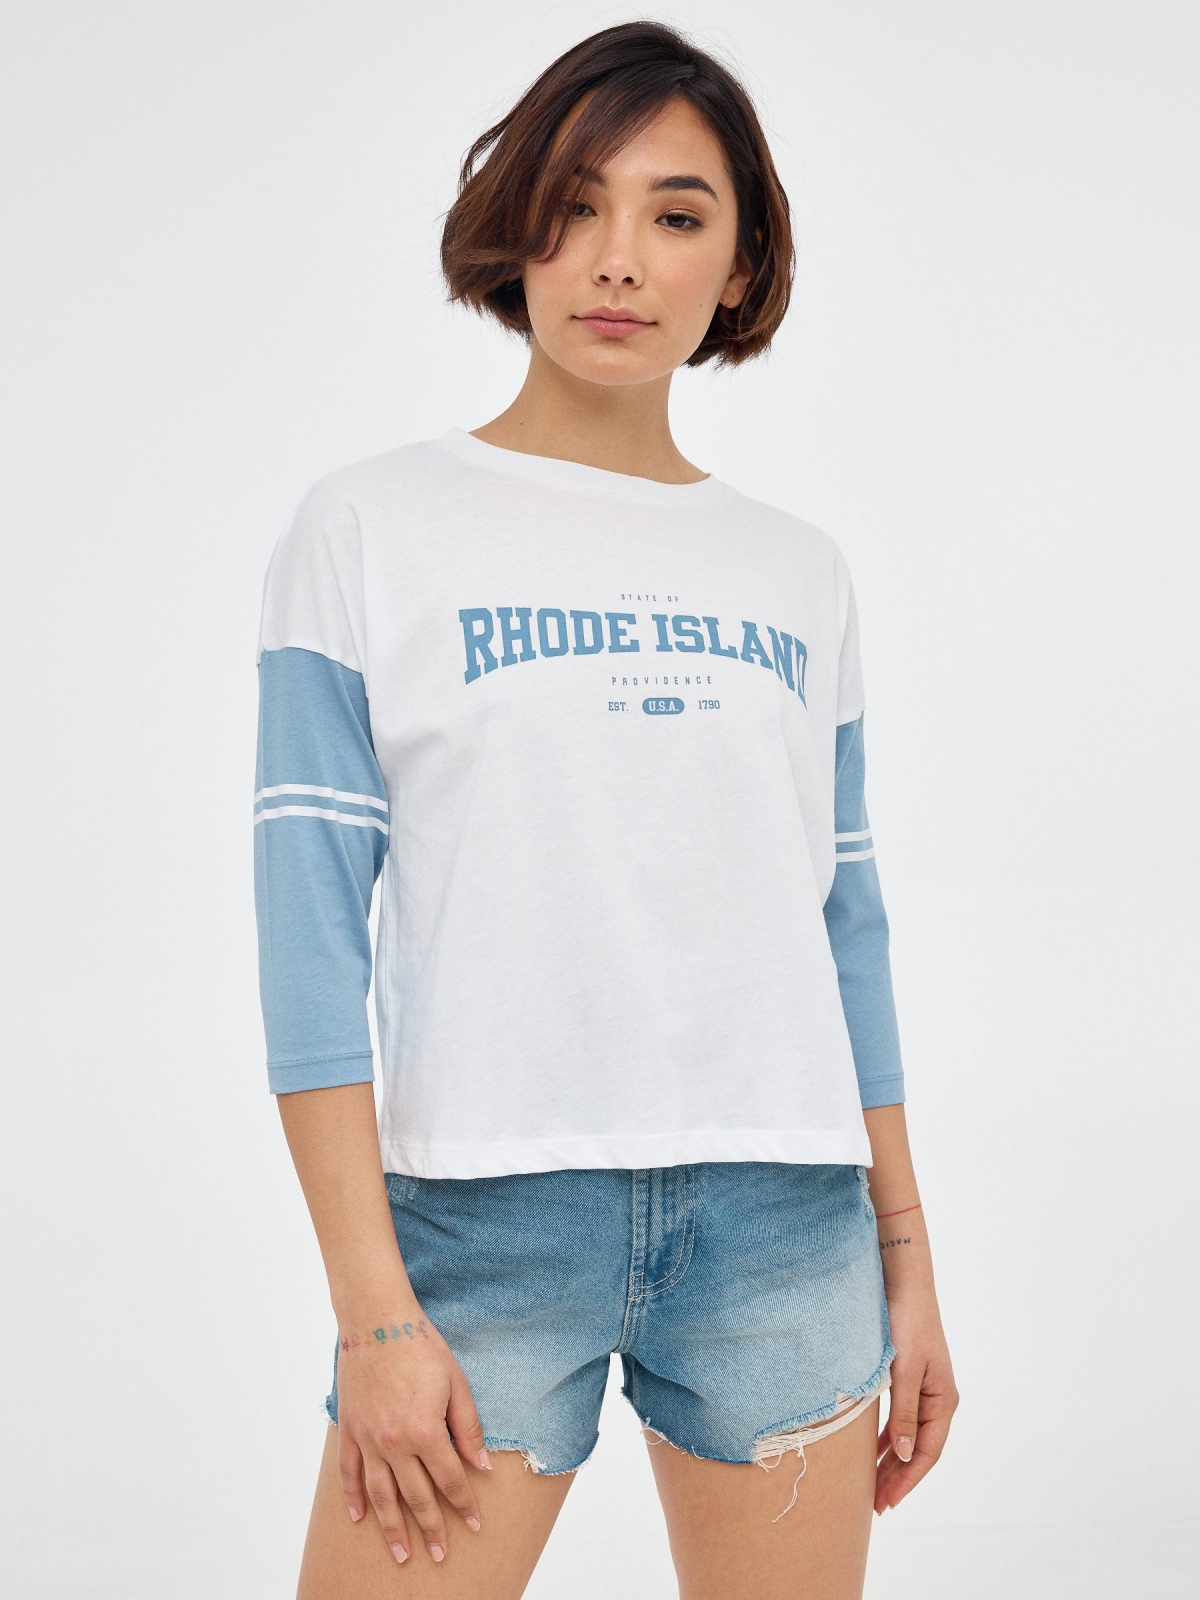 Rhode Island T-shirt steel blue middle front view